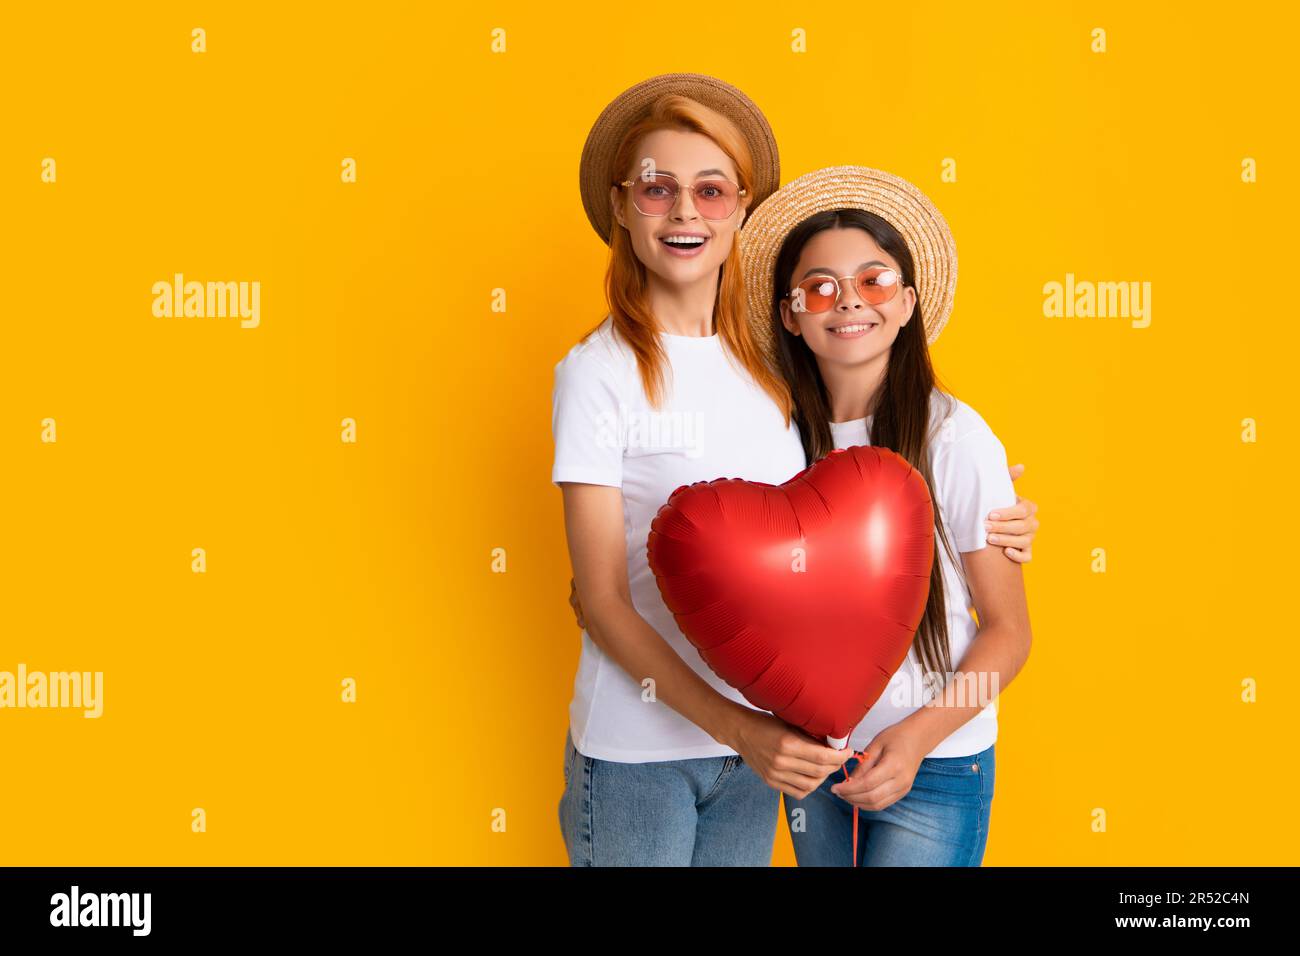 Valentines day. Smiling mother and daughter holding love heart balloon on yellow background. Happy Valentines day to my mom. Love summer. Stock Photo